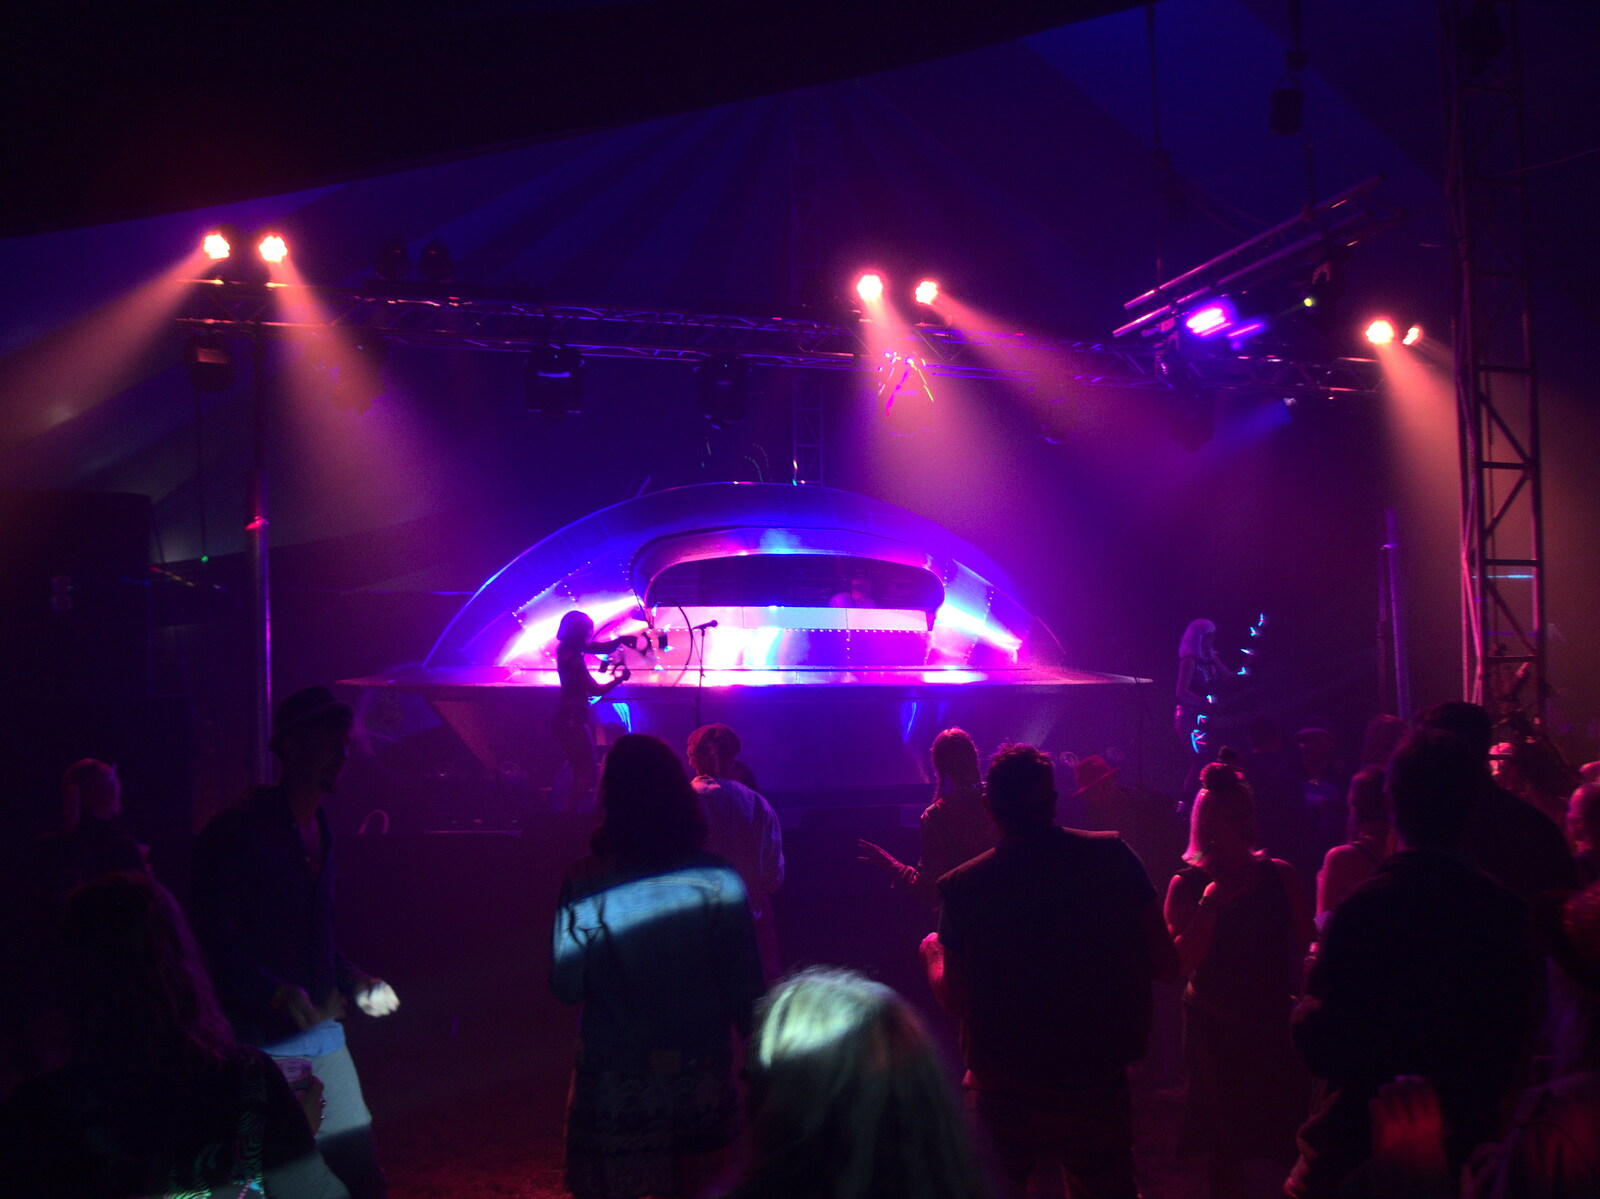 A UFO DJ station in the Outer Limits from Maui Waui Festival, Hill Farm, Gressenhall, Norfolk - 28th August 2021